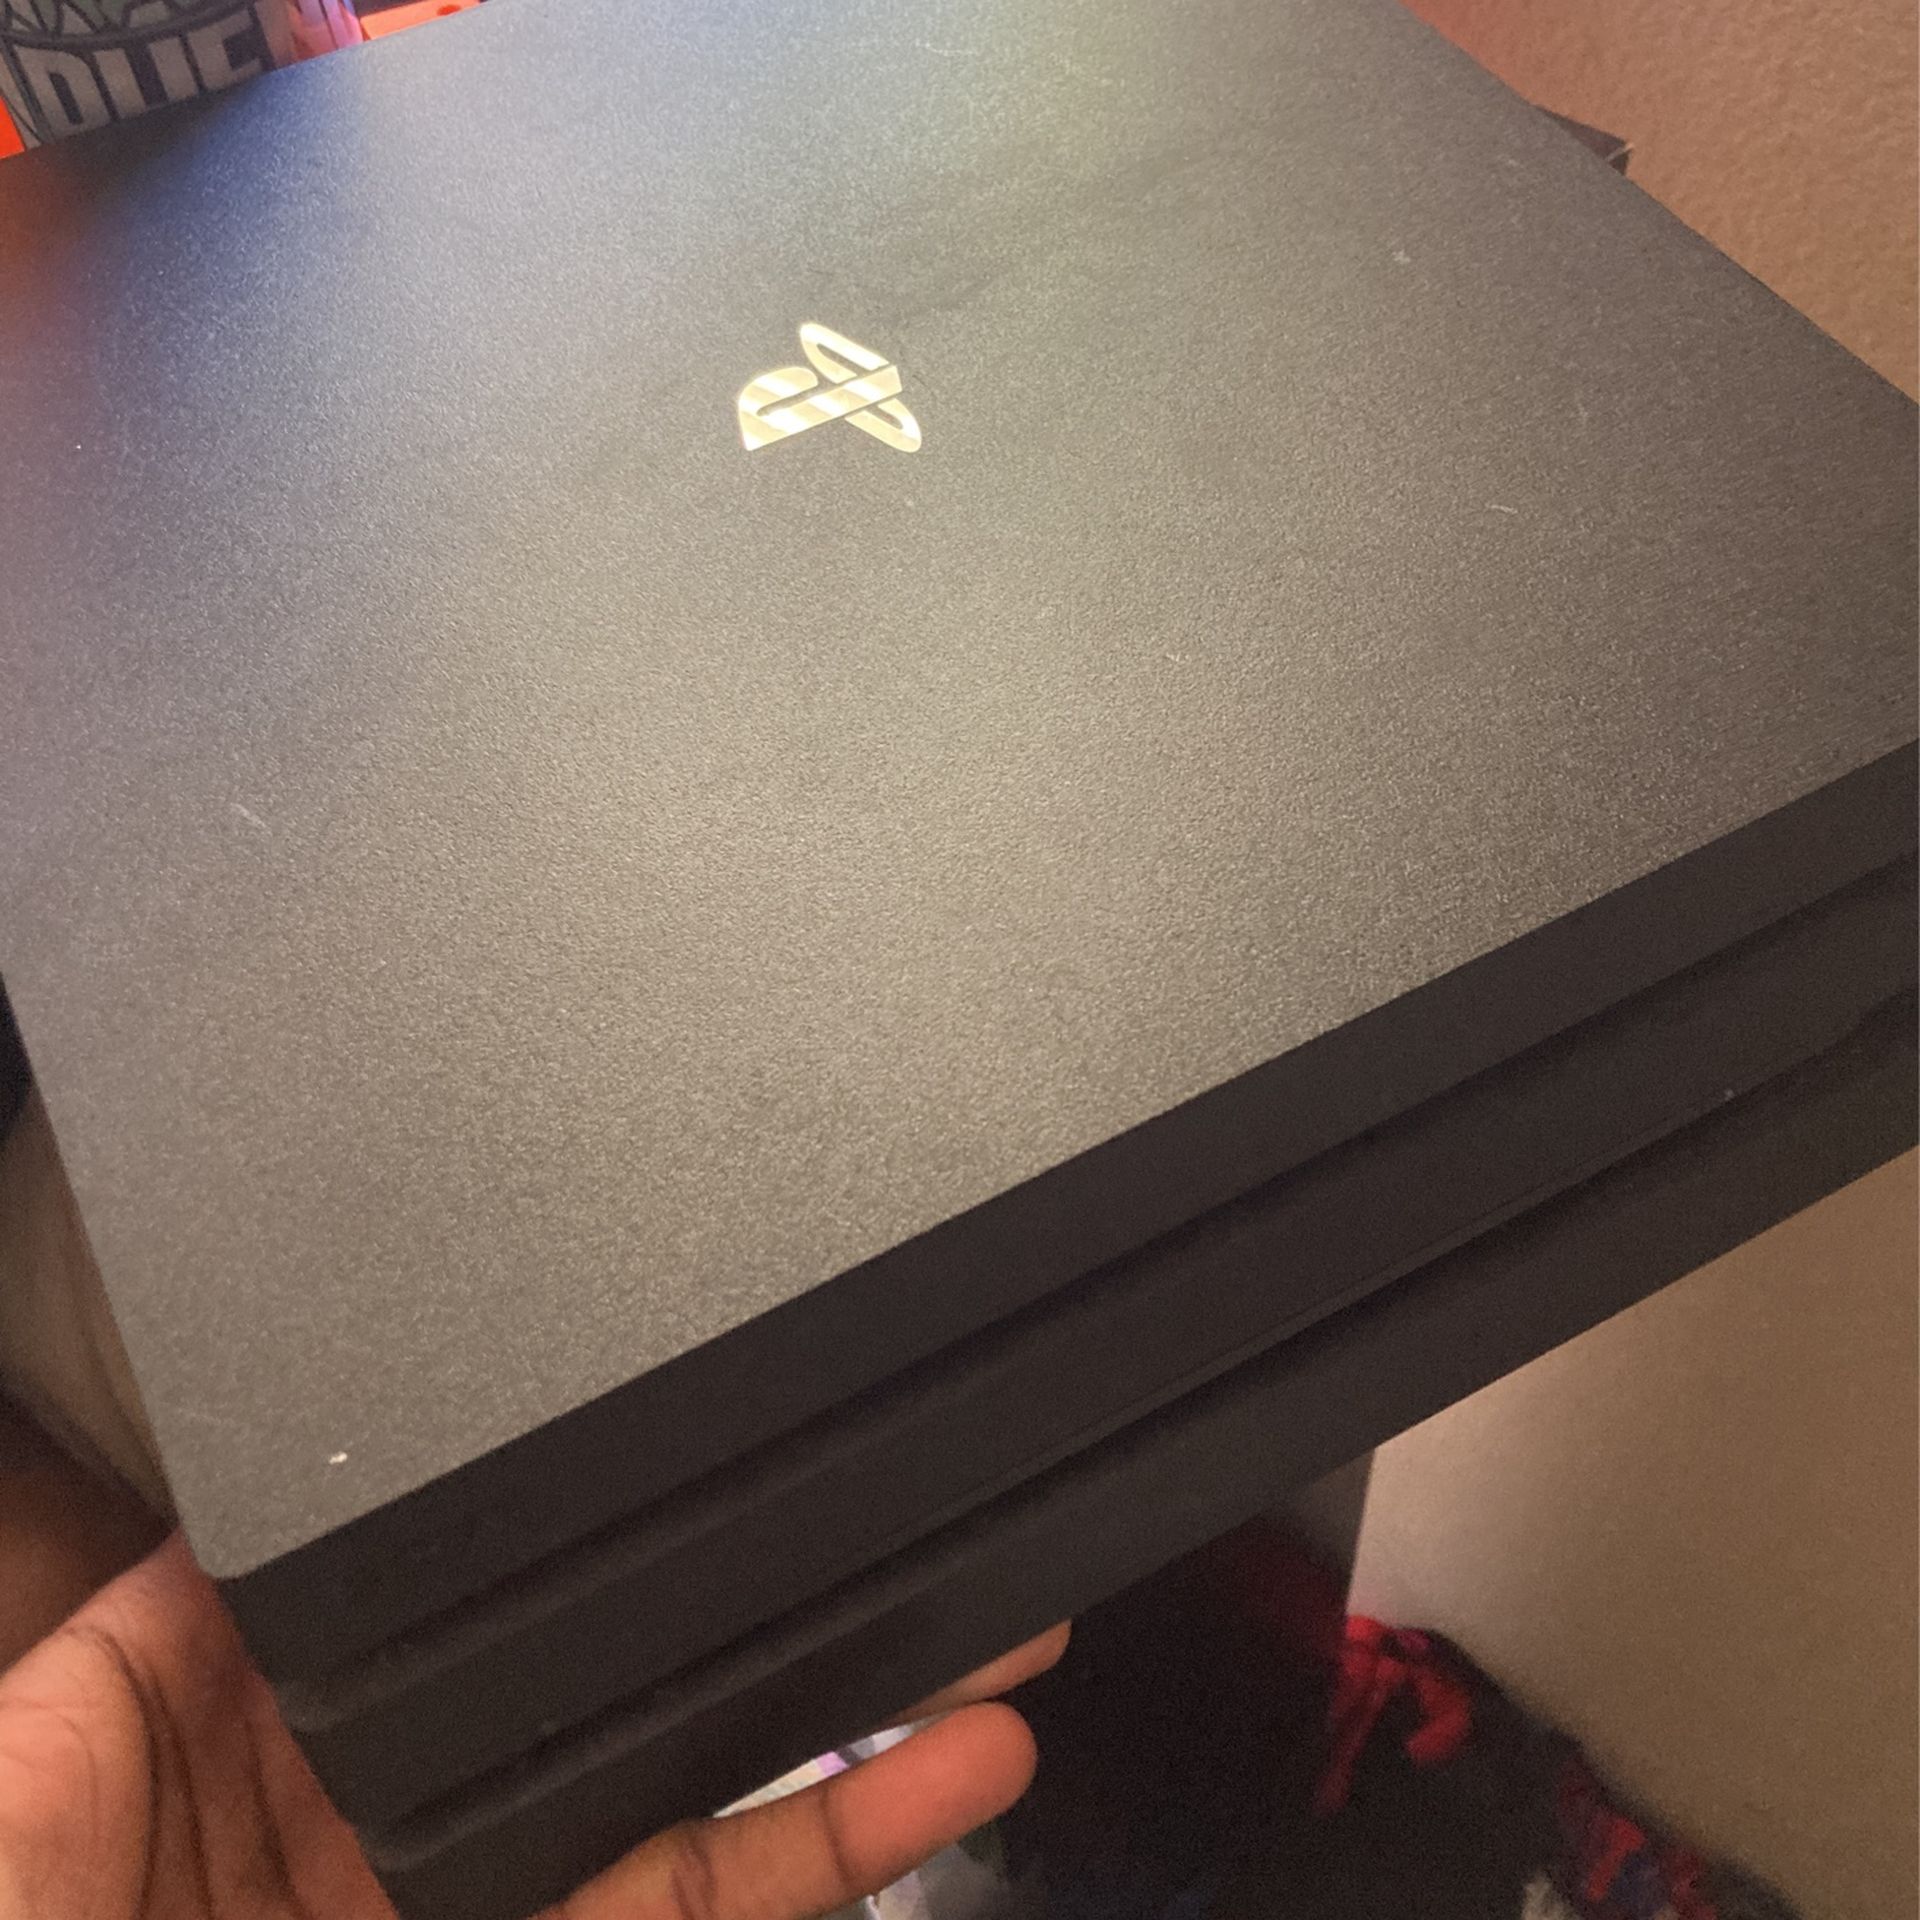 PS4 Pro Only Been Used 1 Time It Is Very Much Clean Its So Nice To Play On 